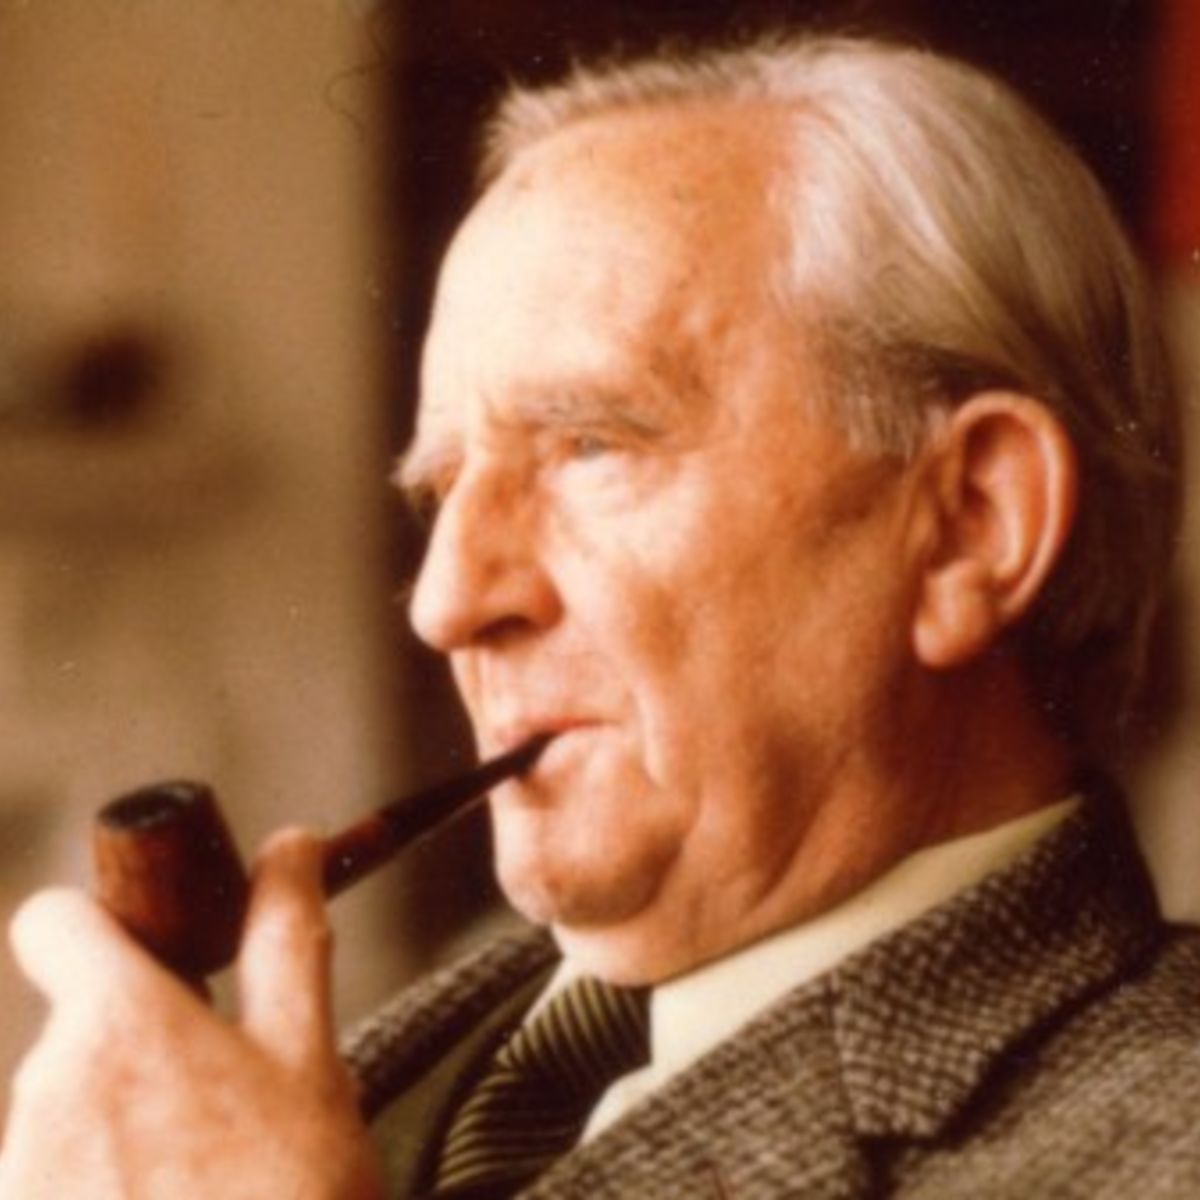 8 fun facts about J.R.R. Tolkien on his 122 birthday | SYFY WIRE